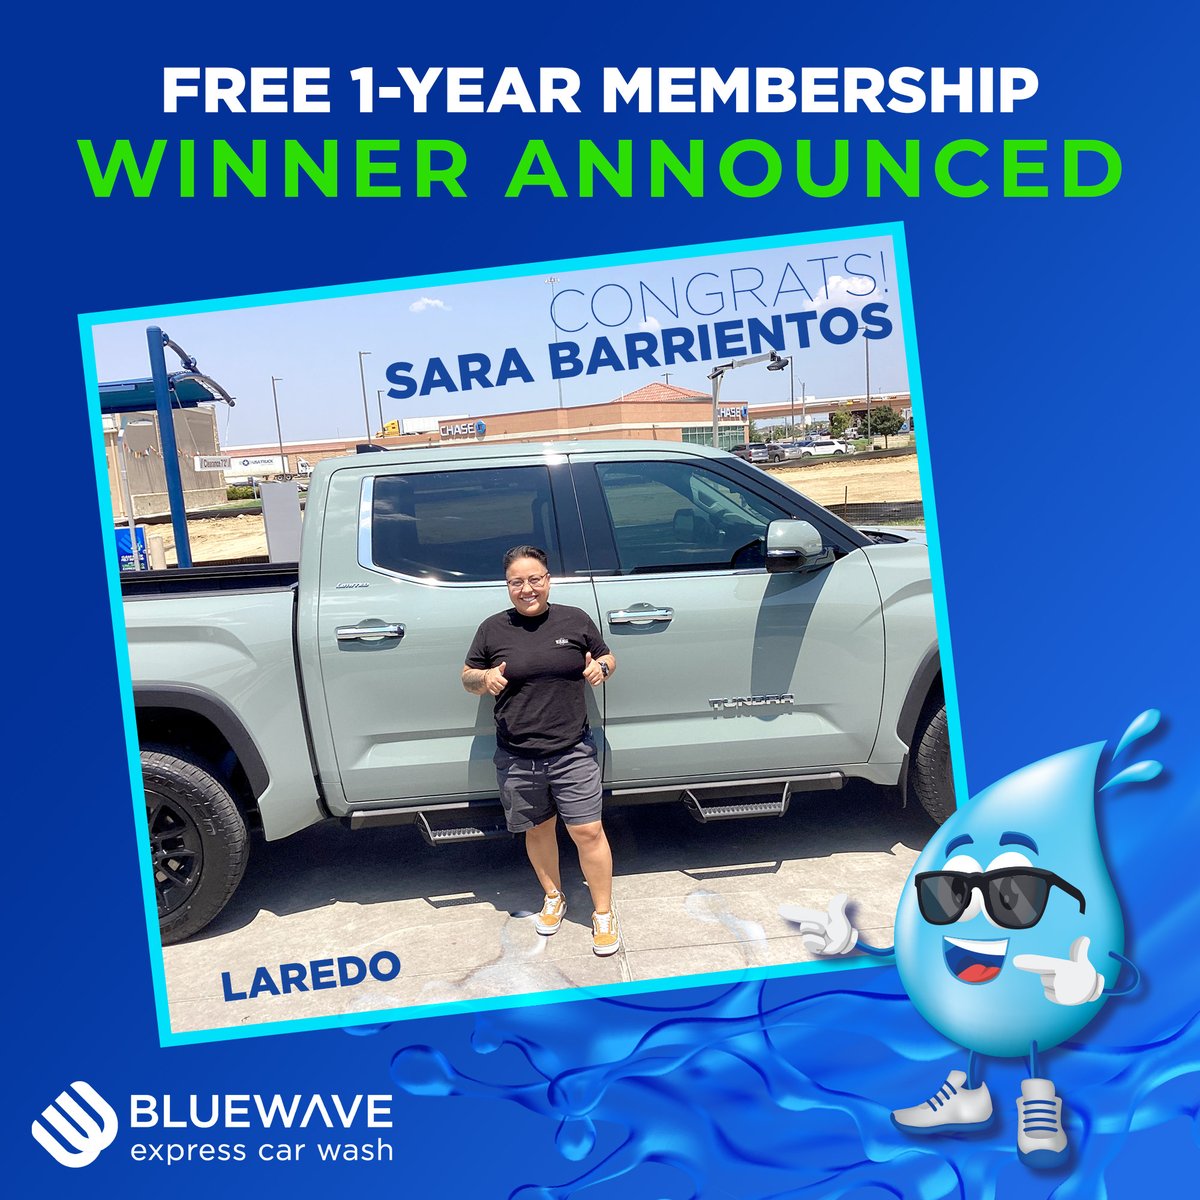 Congratulations to our #LaredoTX #winner! Enjoy your year of #freecarwashes, Sara! We are grateful for our customers and extend a heartfelt thanks for your patience and unwavering support during this transformation to enhance our #carwash services.
#BlueWaveExpress #unlimited